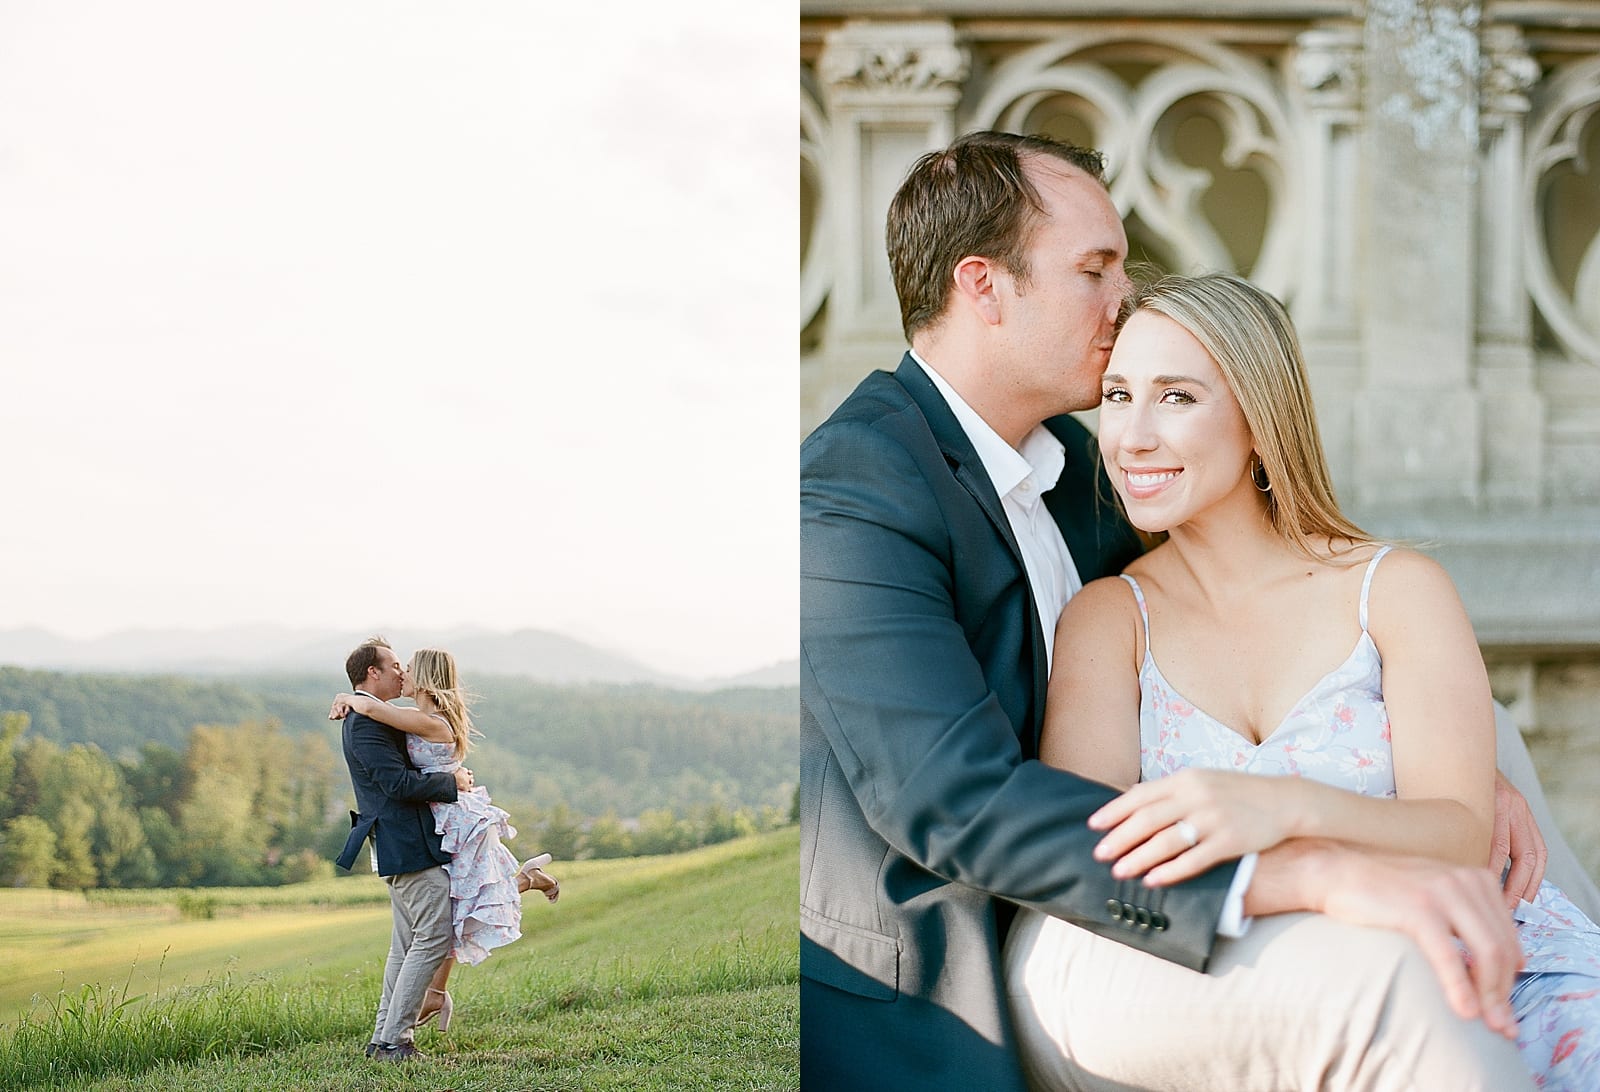 Couple in Field with Mountains and Biltmore In Asheville Snuggling Photos